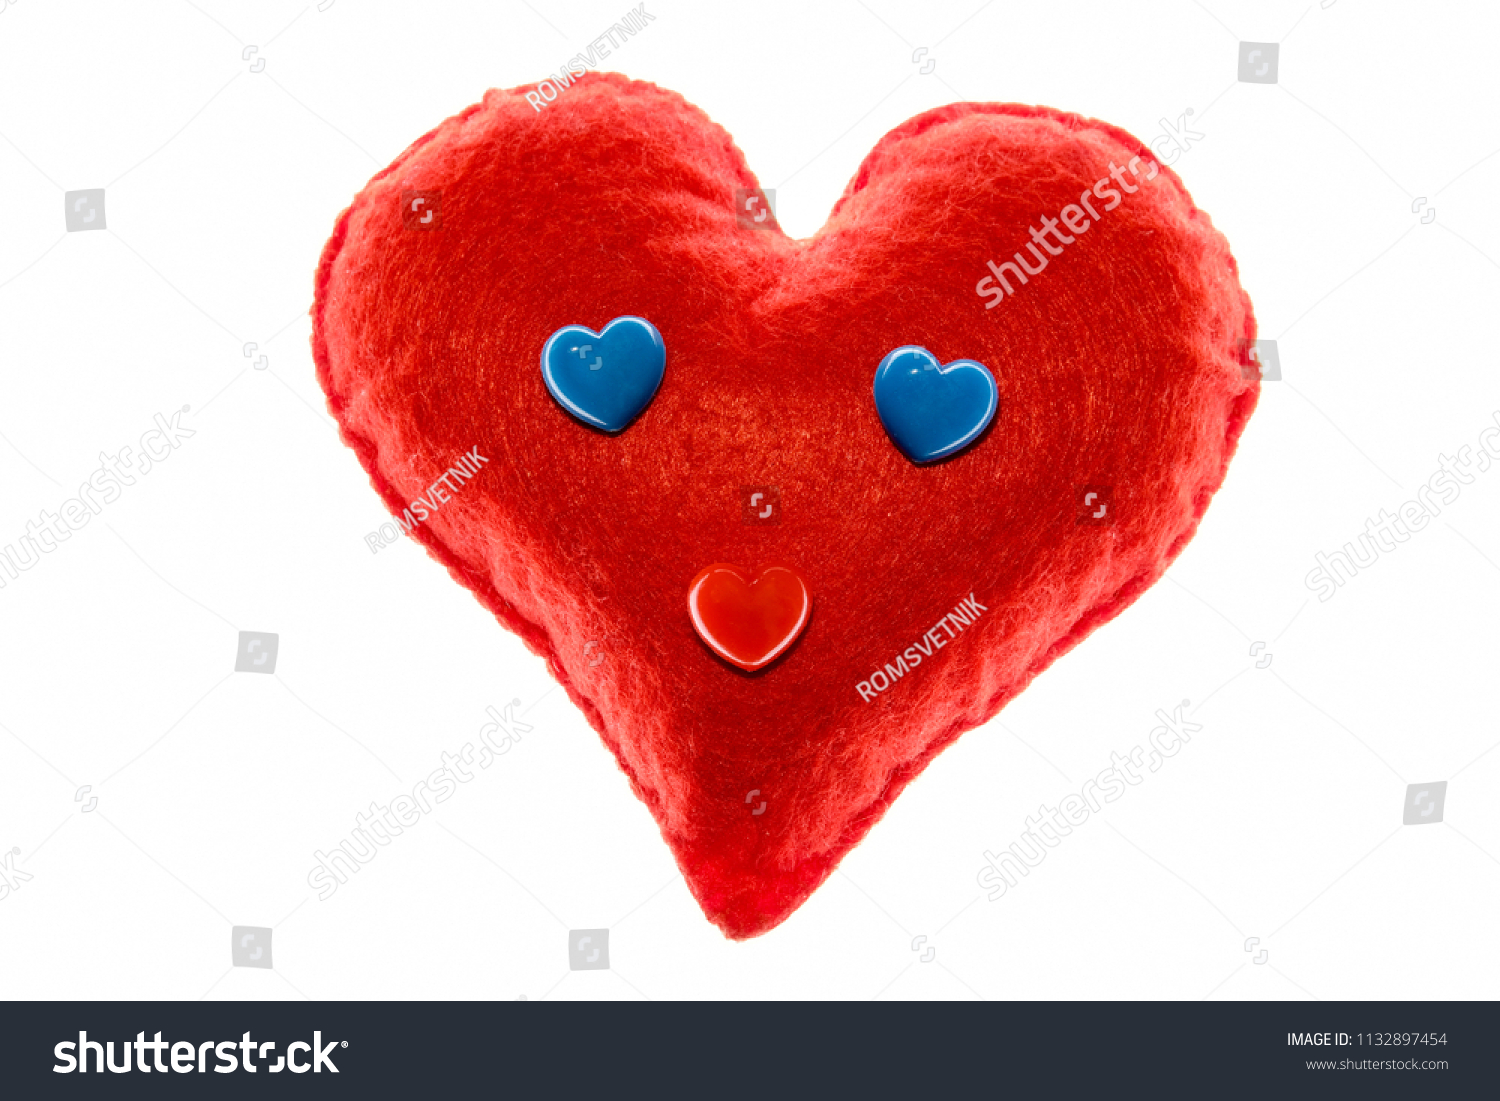 Soft red heart. Emotion with blue eyes. A symbol of love and happiness. Close-up. White background. #1132897454